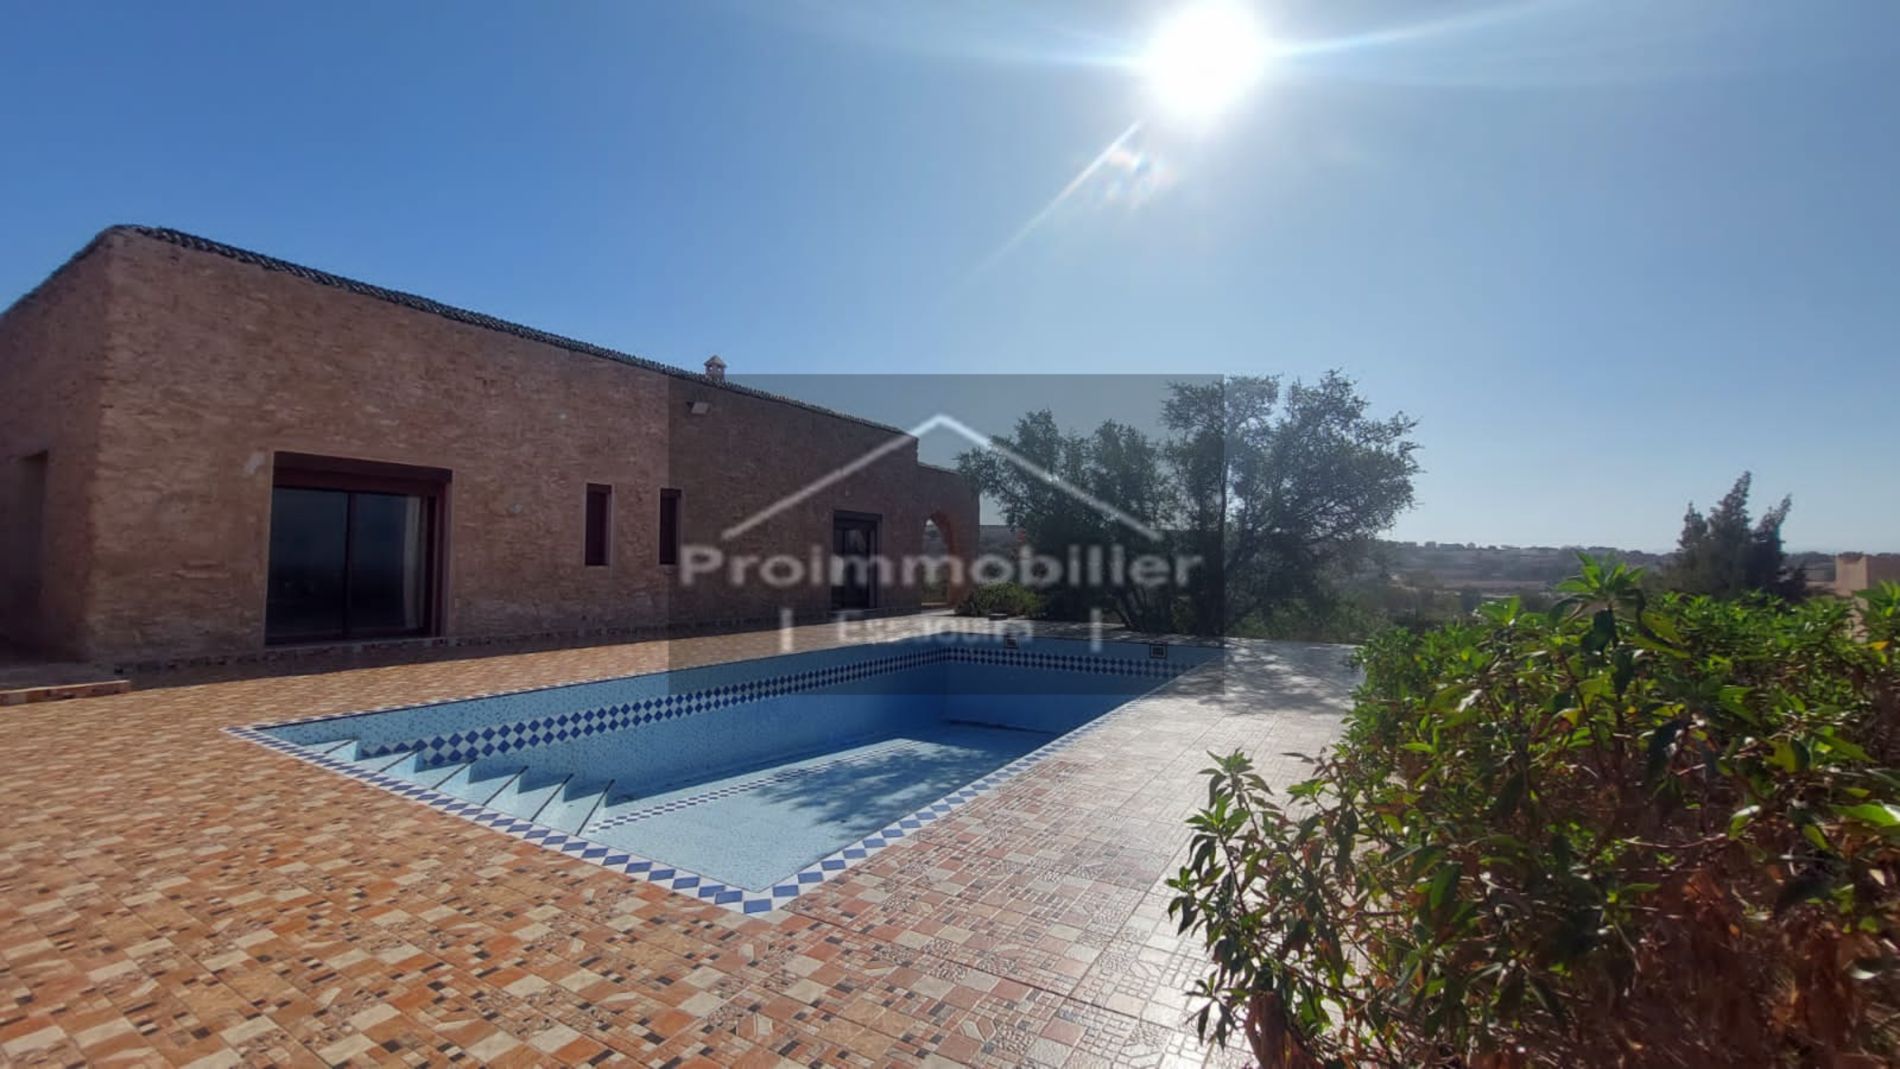 23-11-01-VM Beautiful House in countryside of 320 m² for sale in Essaouira Land 3633 m²